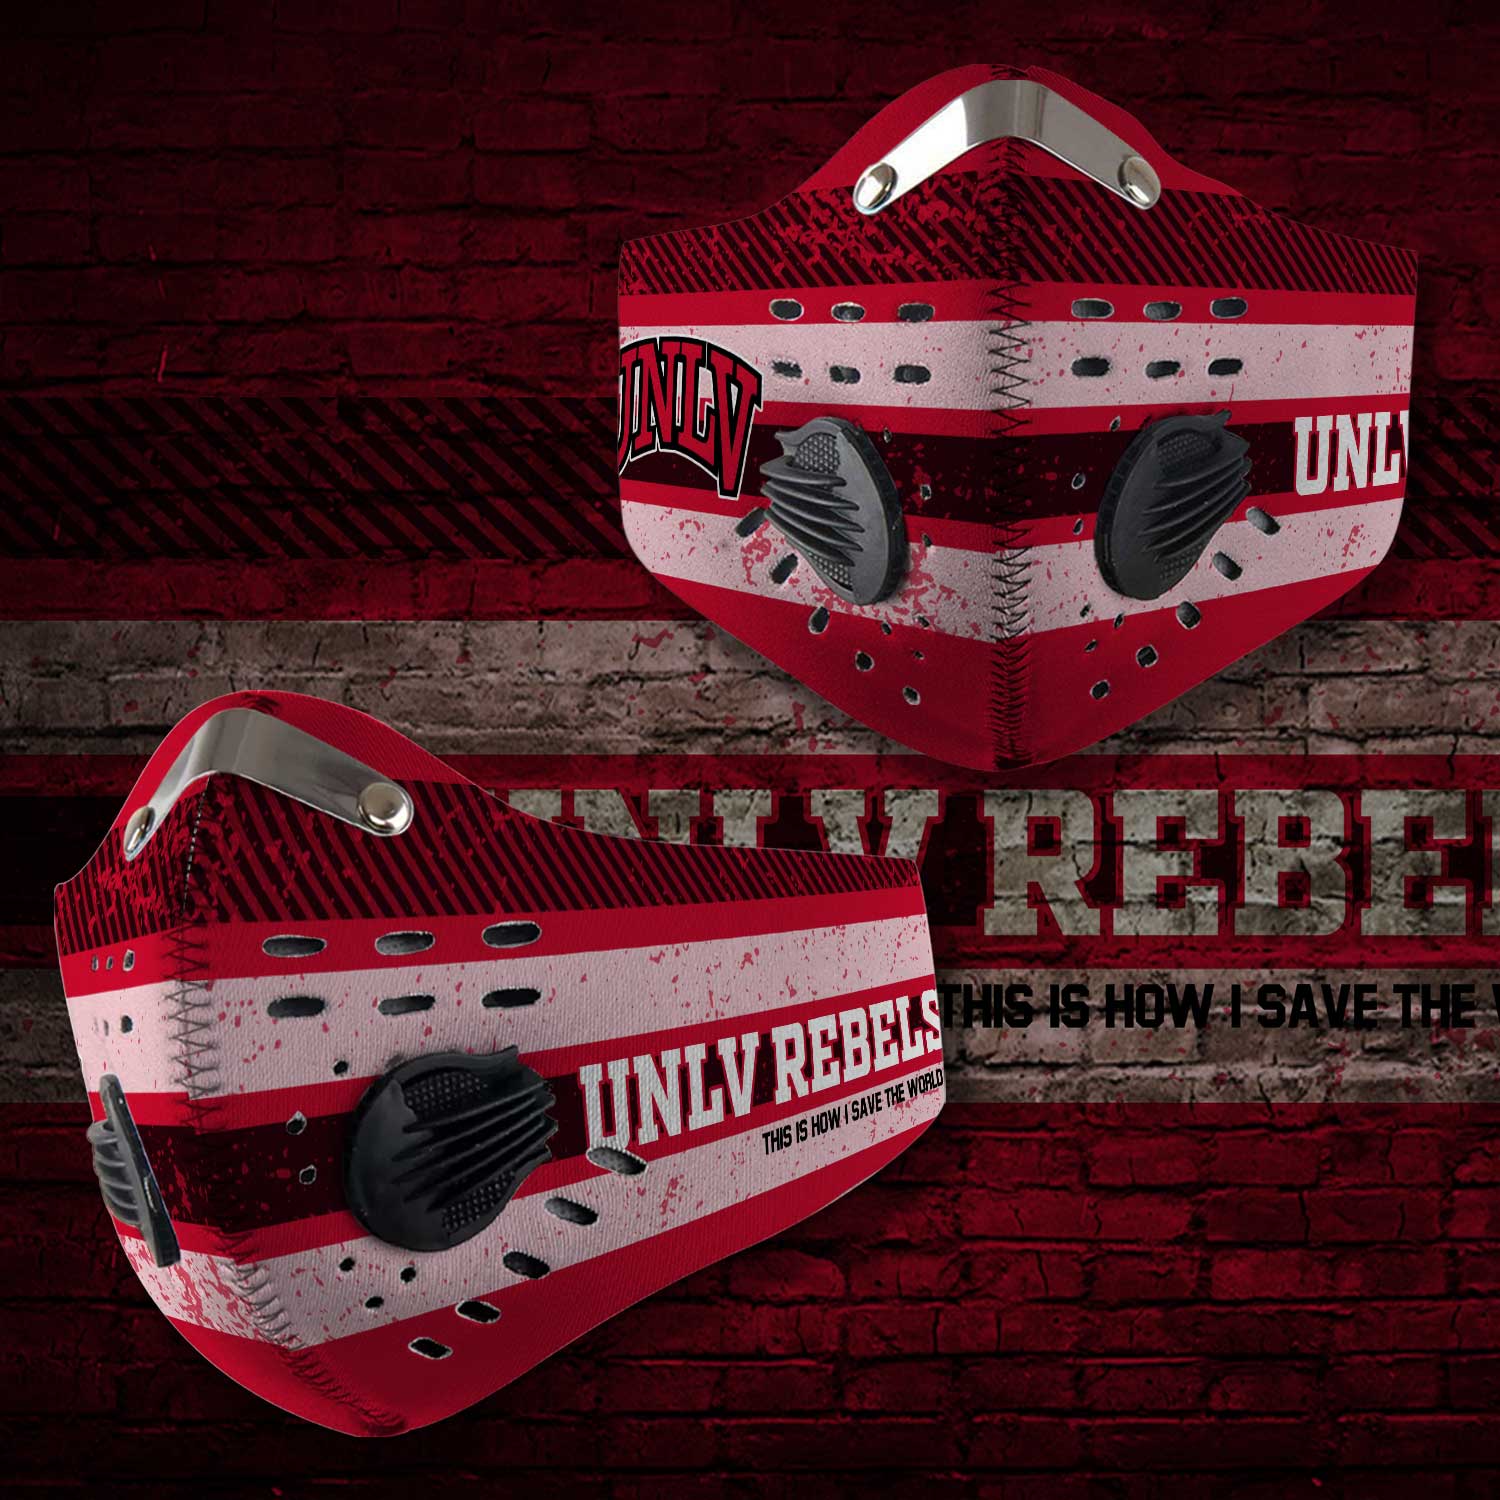 UNLV rebels this is how i save the world carbon filter face mask